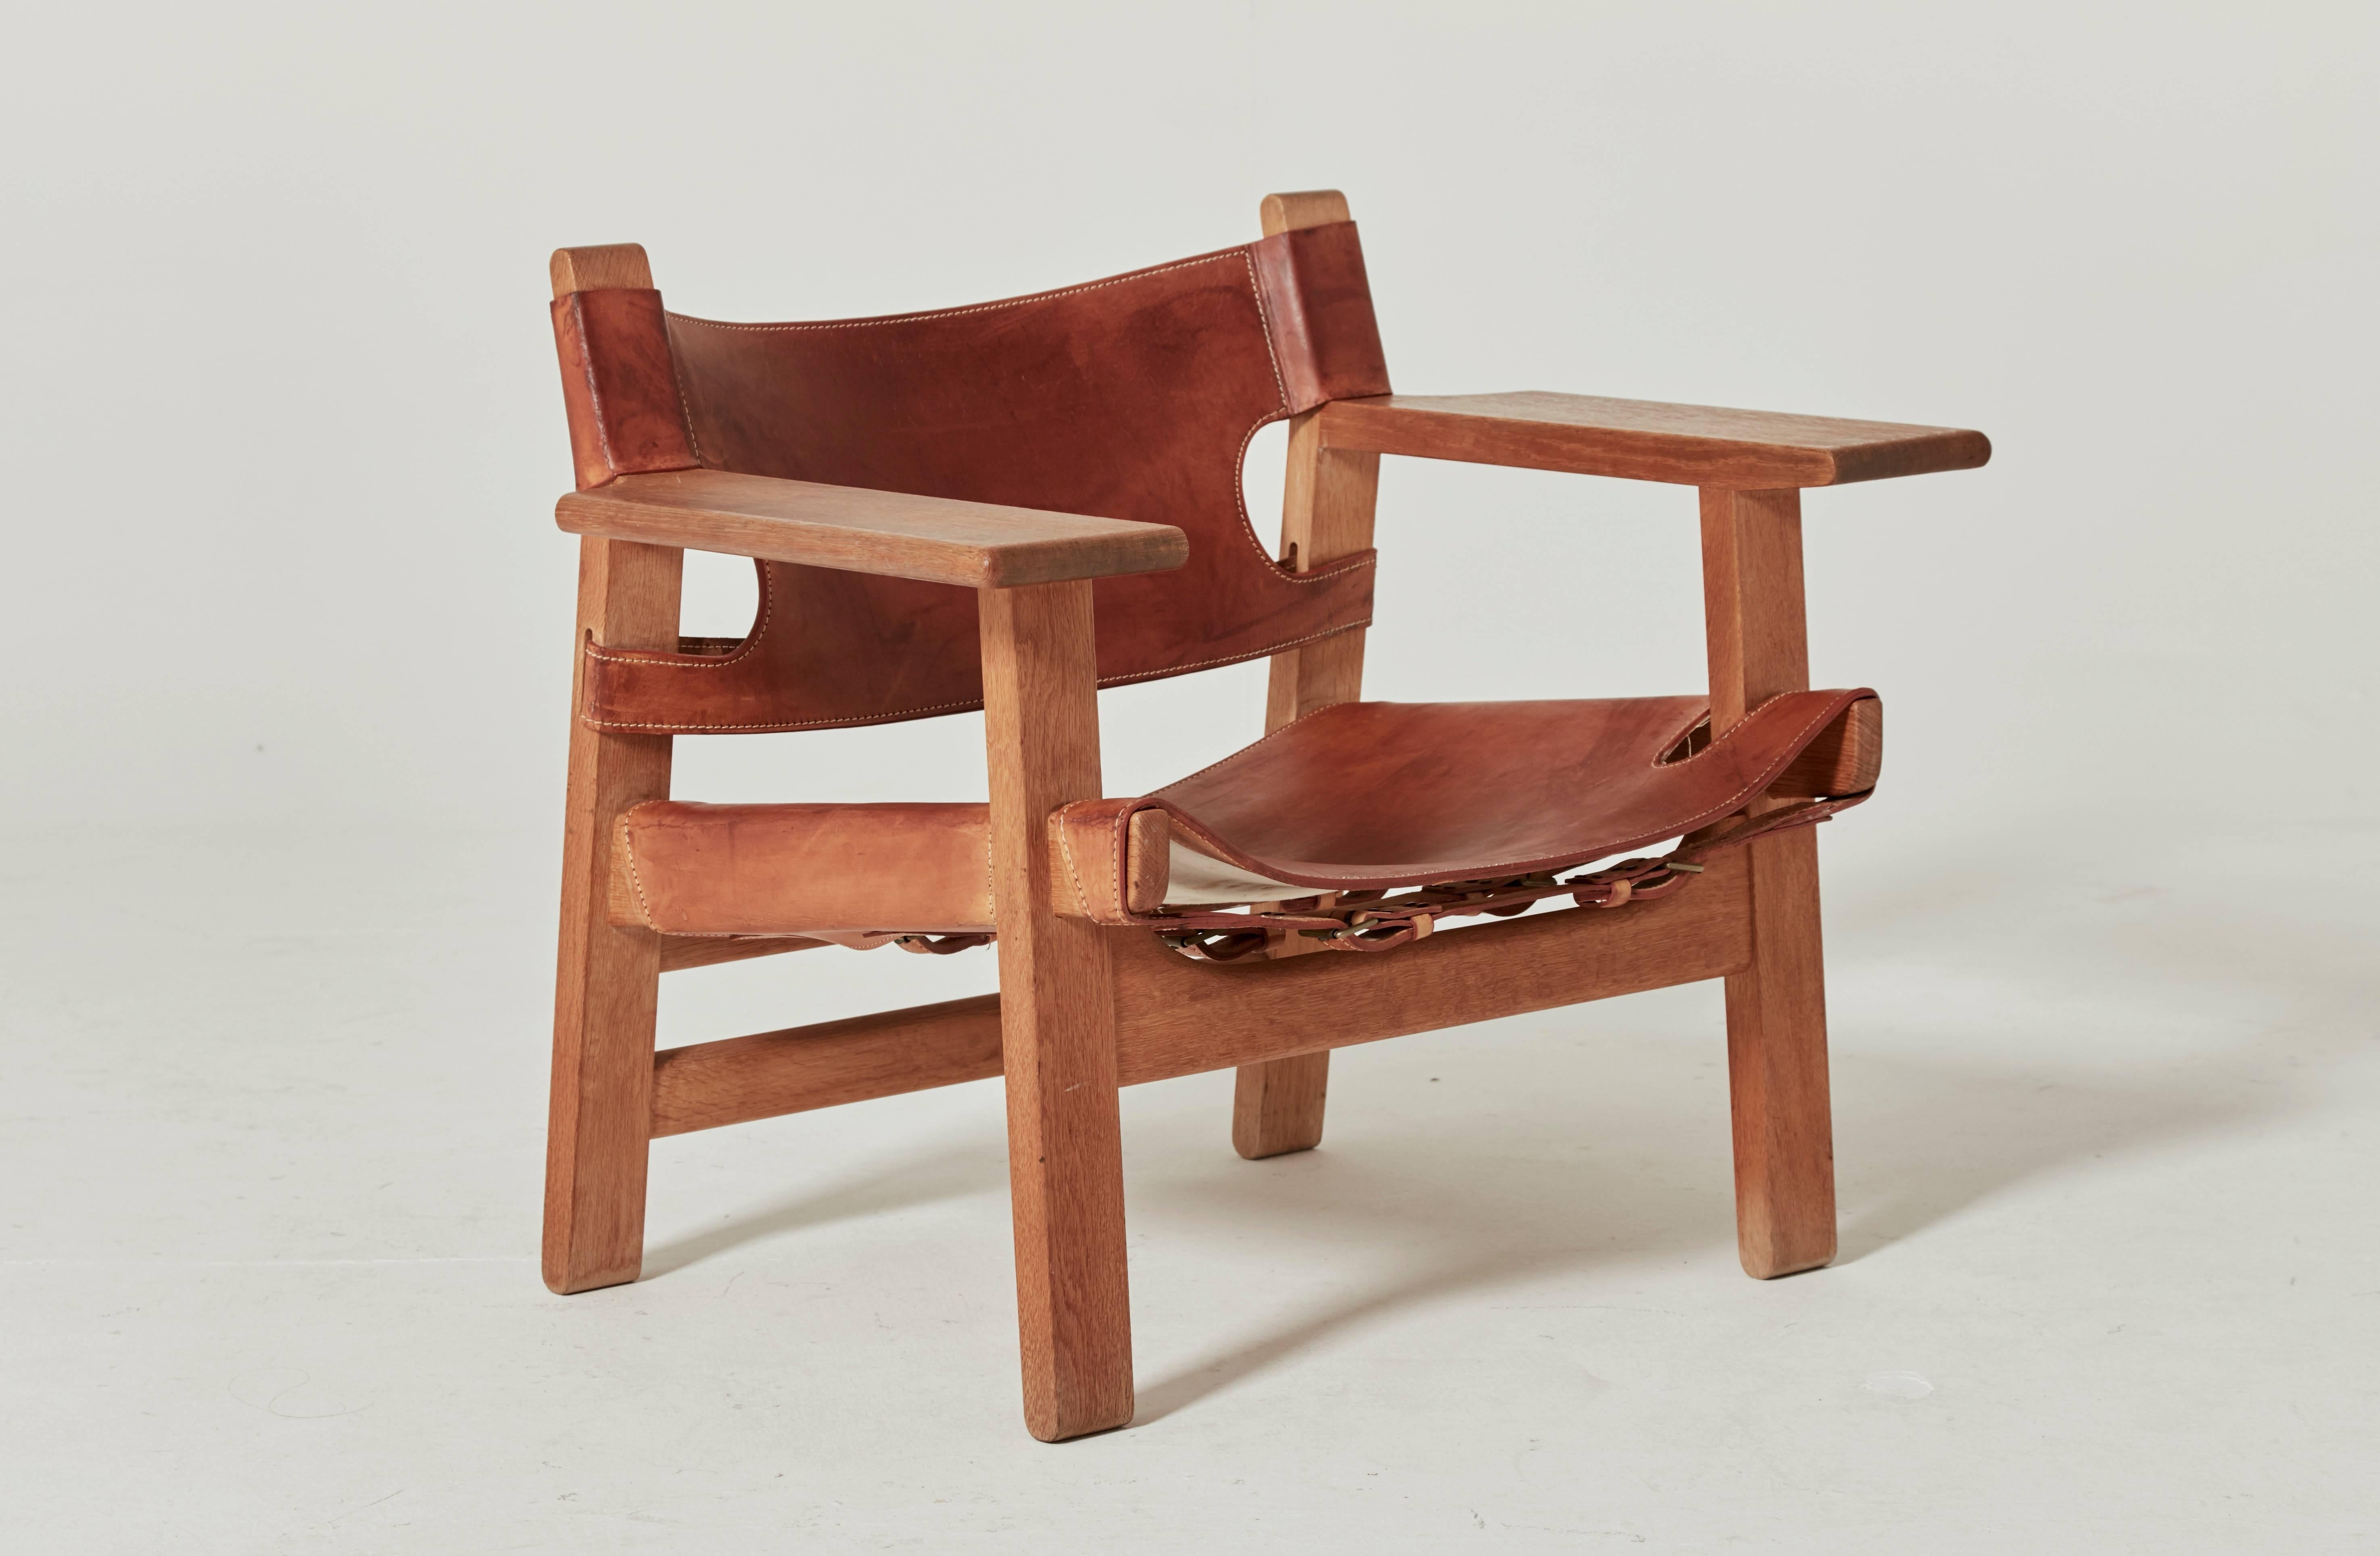 Early and original Børge Mogensen Spanish chair for Fredericia, 1960s, Denmark, made from oak and leather. Ships worldwide.

In good original condition with some age related marks and signs of use and wear to frame and leather.

